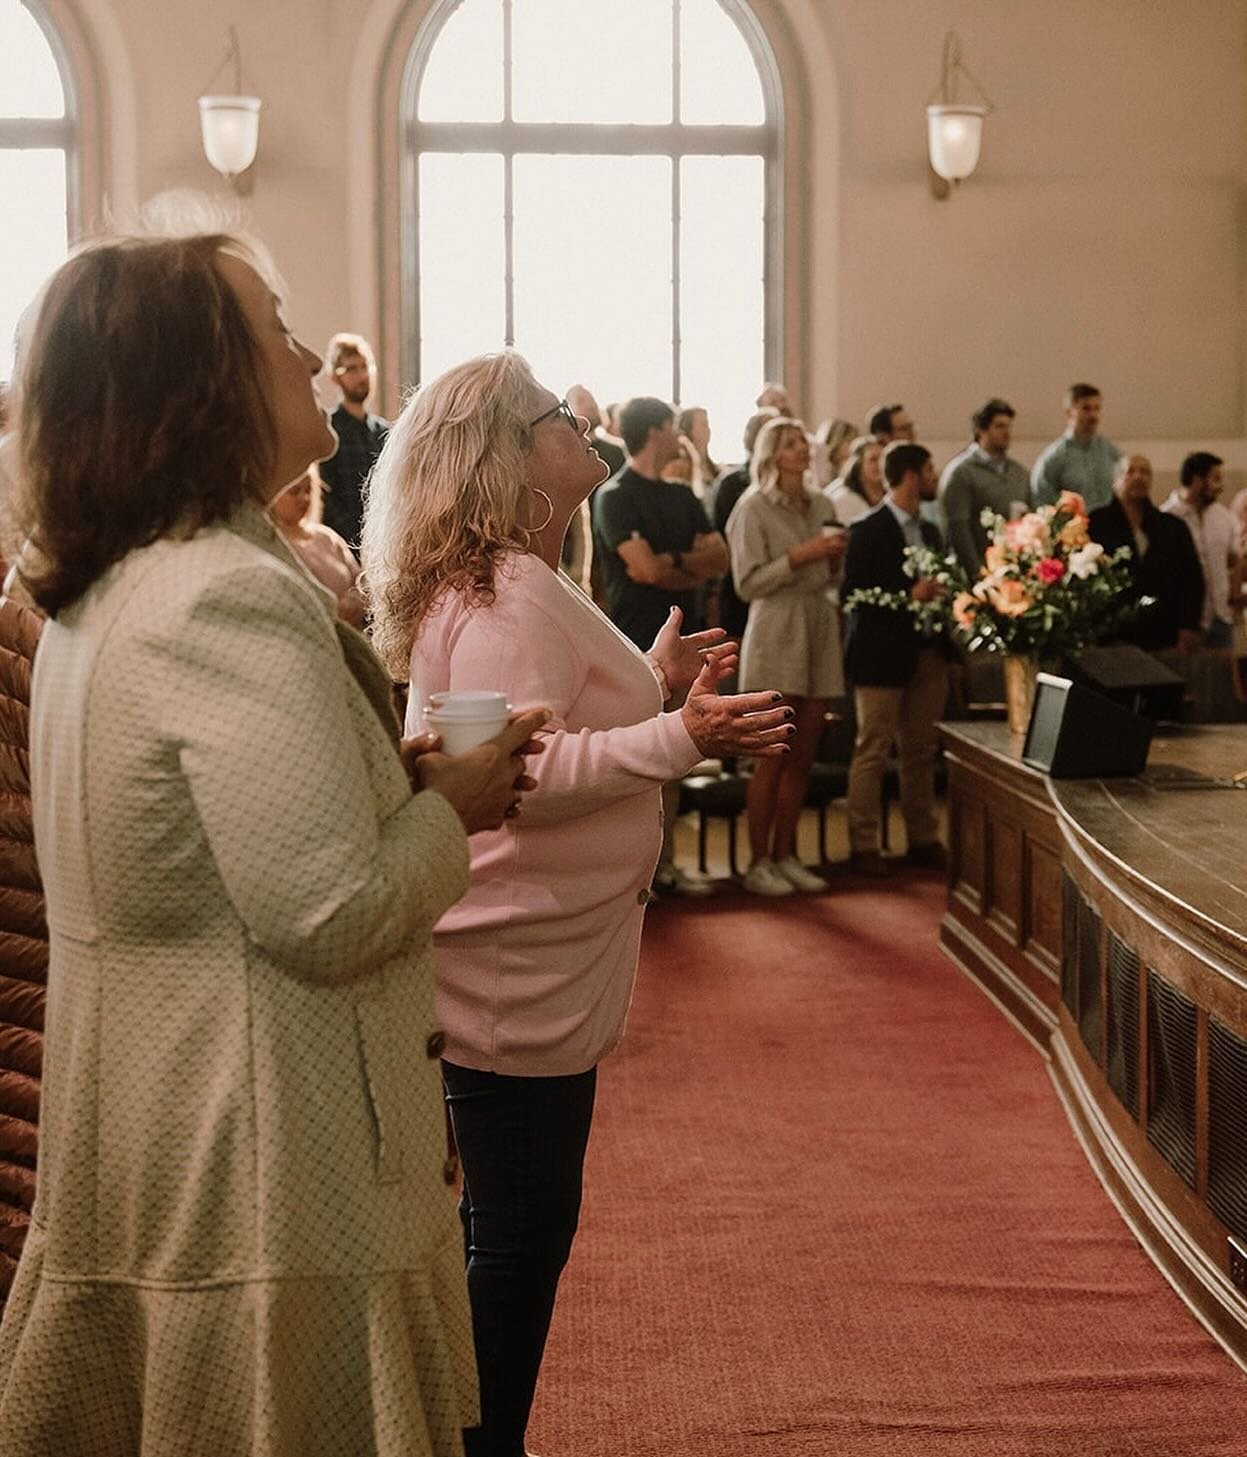 When we sing on Sunday Mornings, we&rsquo;re not just feeling good feelings and listening to talented musicians (though those things are wonderful!)

We&rsquo;re actually collectively singing the truths about God from our heads down into our hearts.
